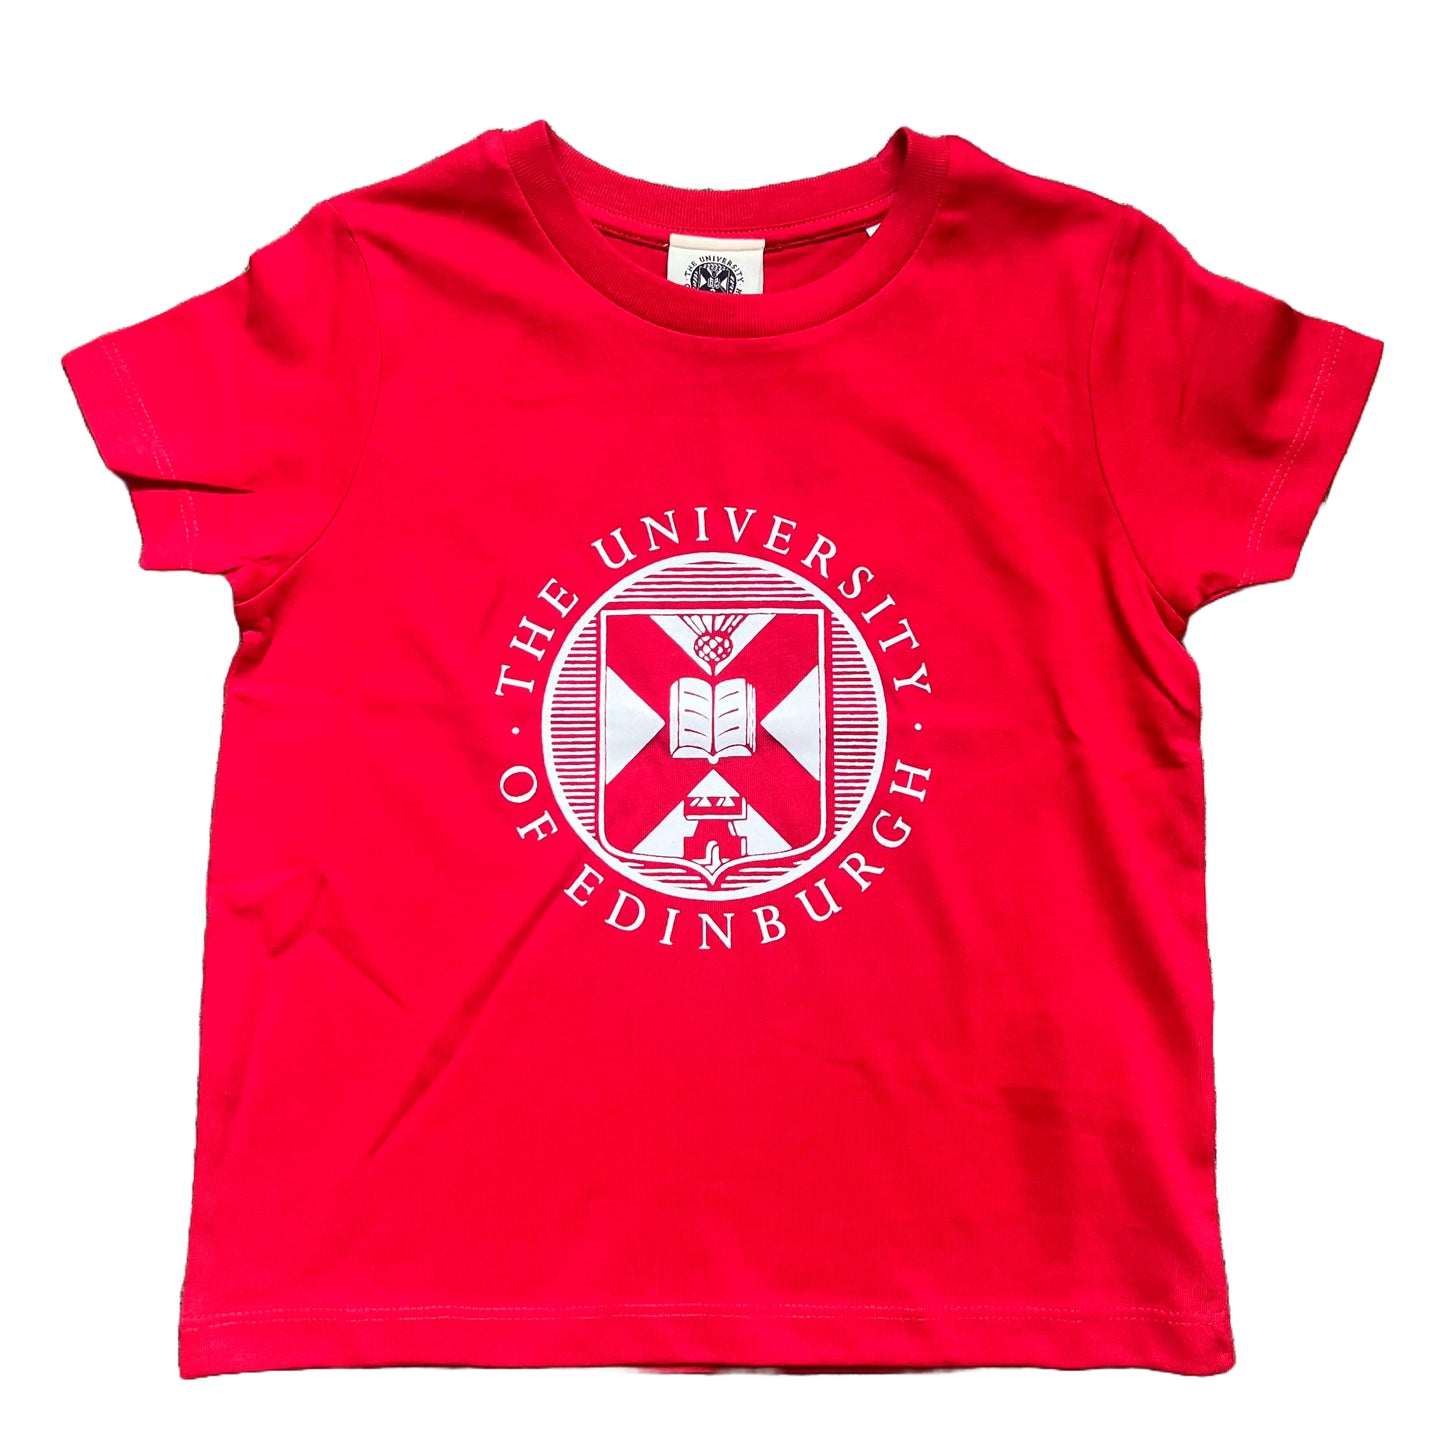 A bright red kids t-shirt with large white University crest.